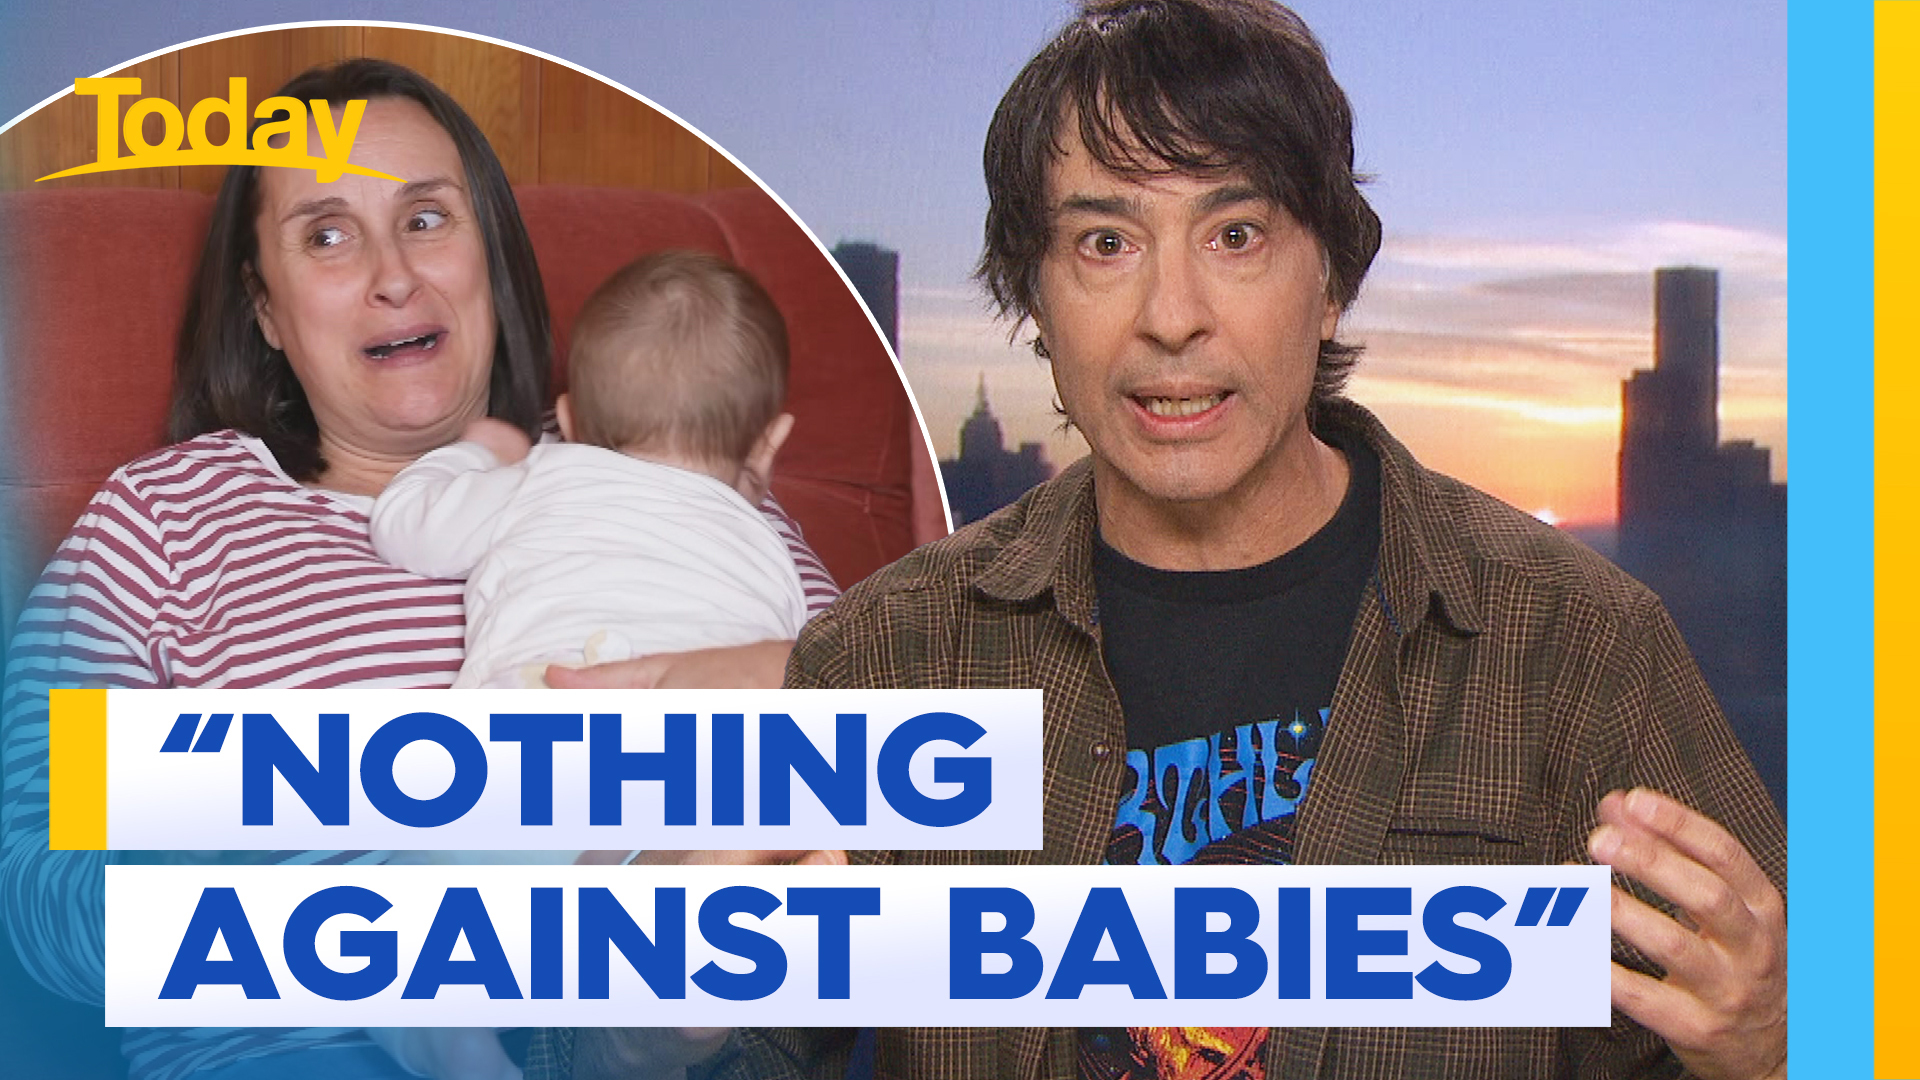 Arj Barker defends decision to kick breastfeeding mum out of show